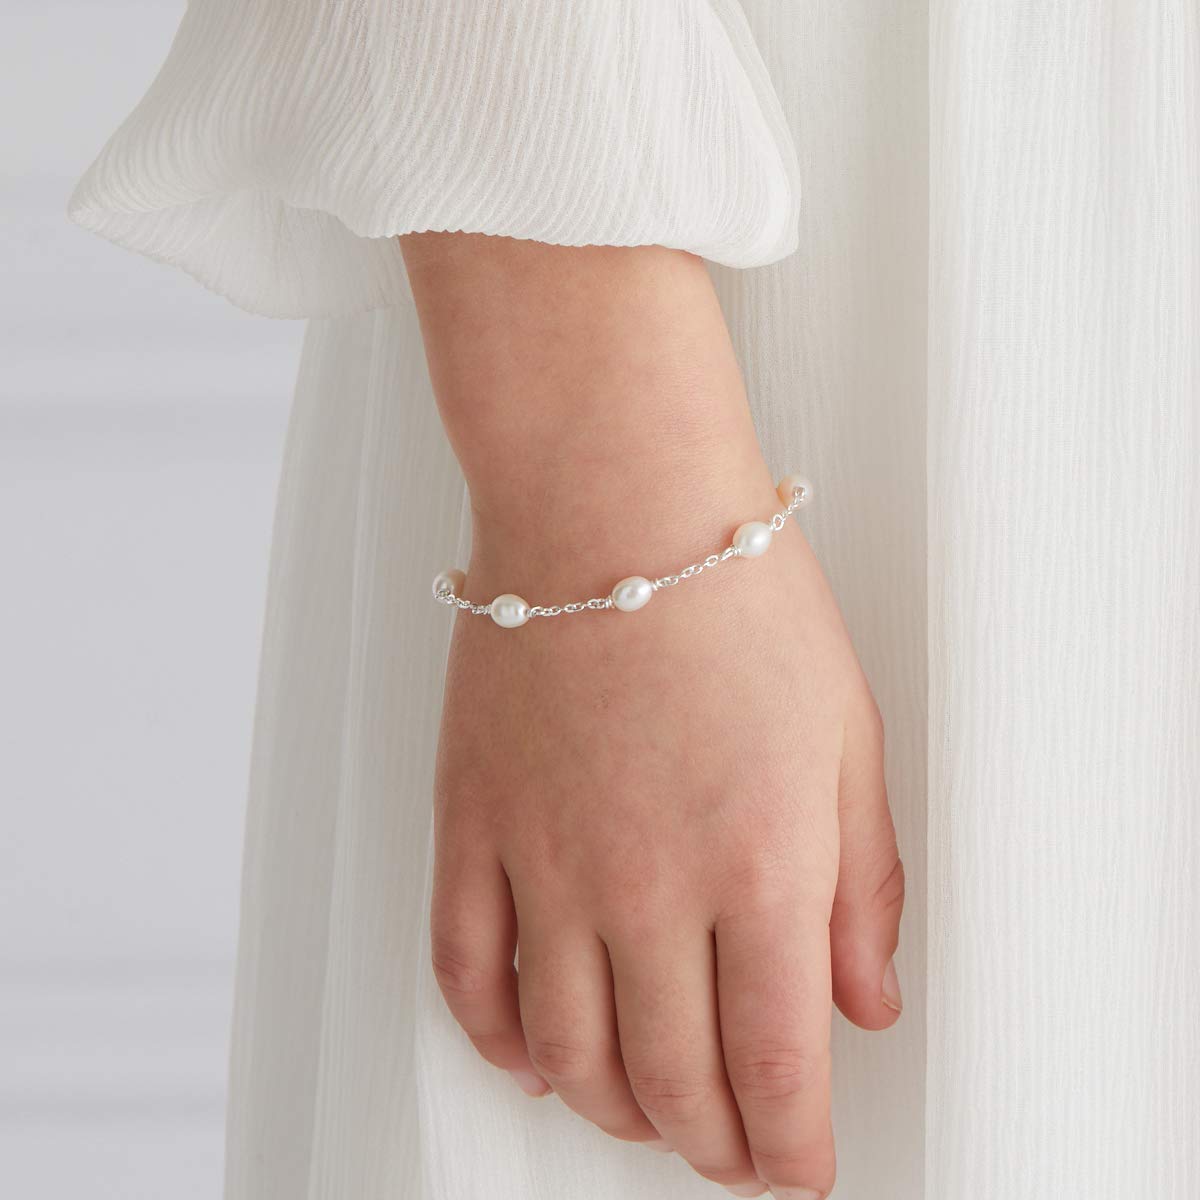 Molly B London Sterling Silver & Pearl Bracelet. Adjustable, Dainty Jewelry Bracelets For Girls, June Birthstone. Perfect First Communion Gifts For Girls, Baptism Gifts, Birthday Gift, Sweet 16